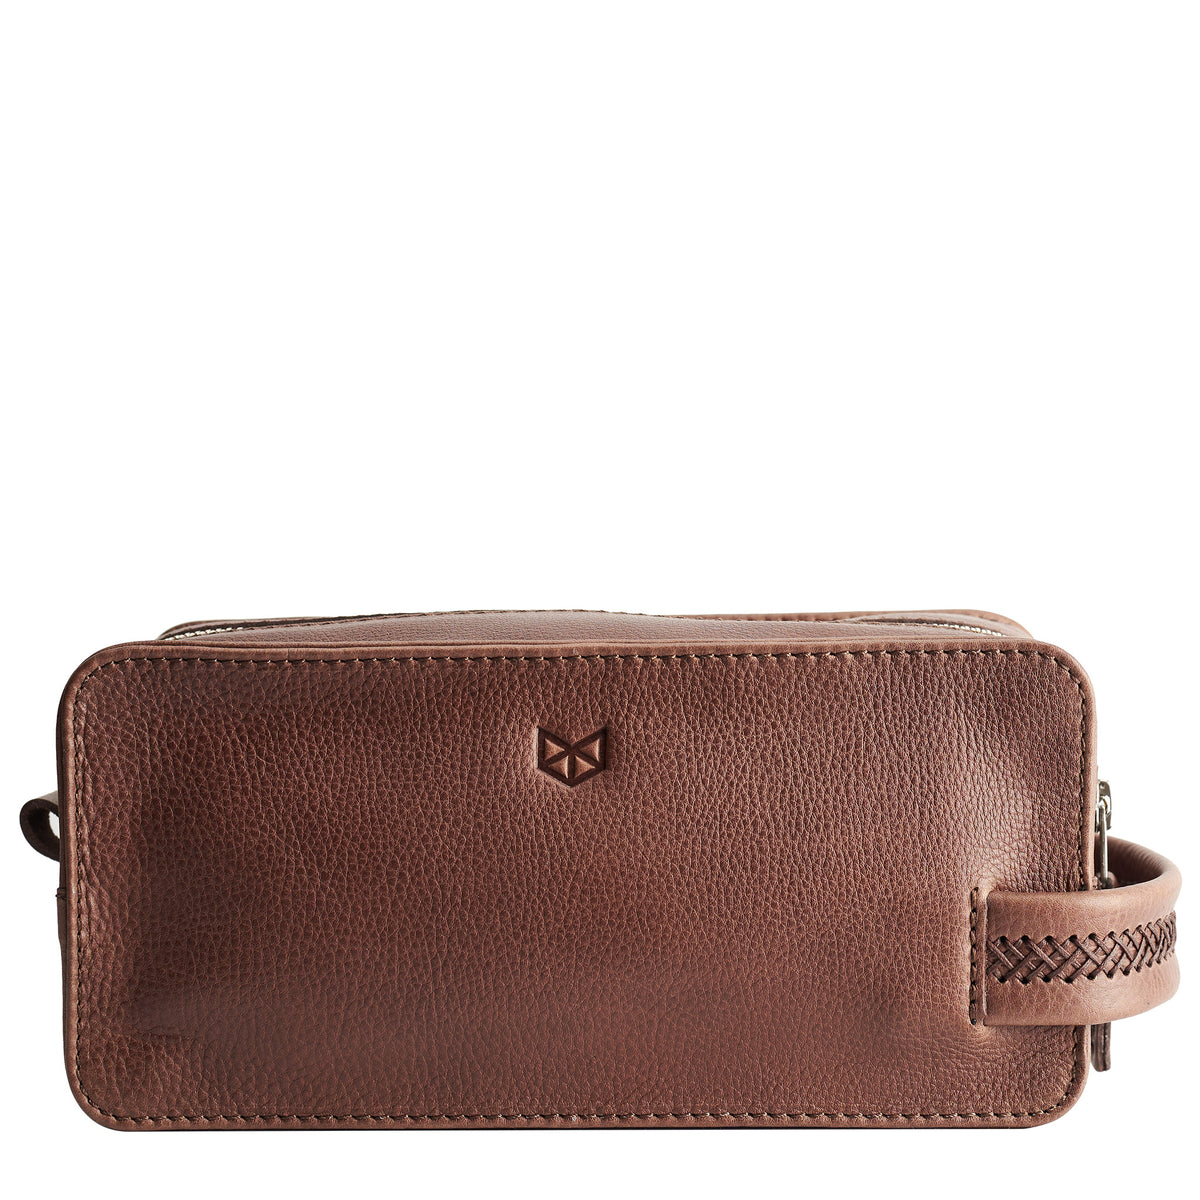 Brown leather toiletry, shaving bag with hand stitched handle. Groomsmen gifts